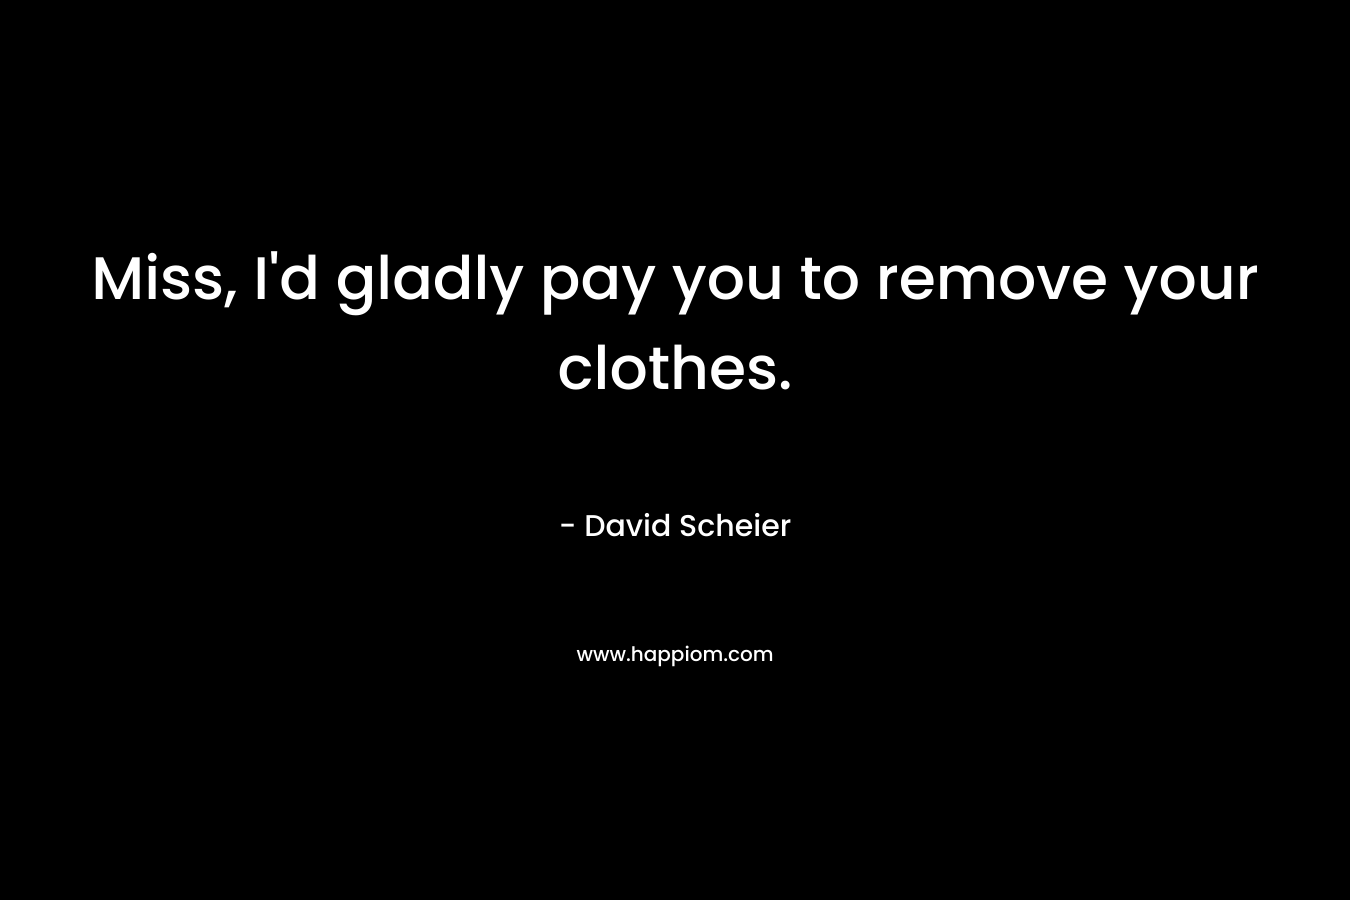 Miss, I’d gladly pay you to remove your clothes. – David Scheier